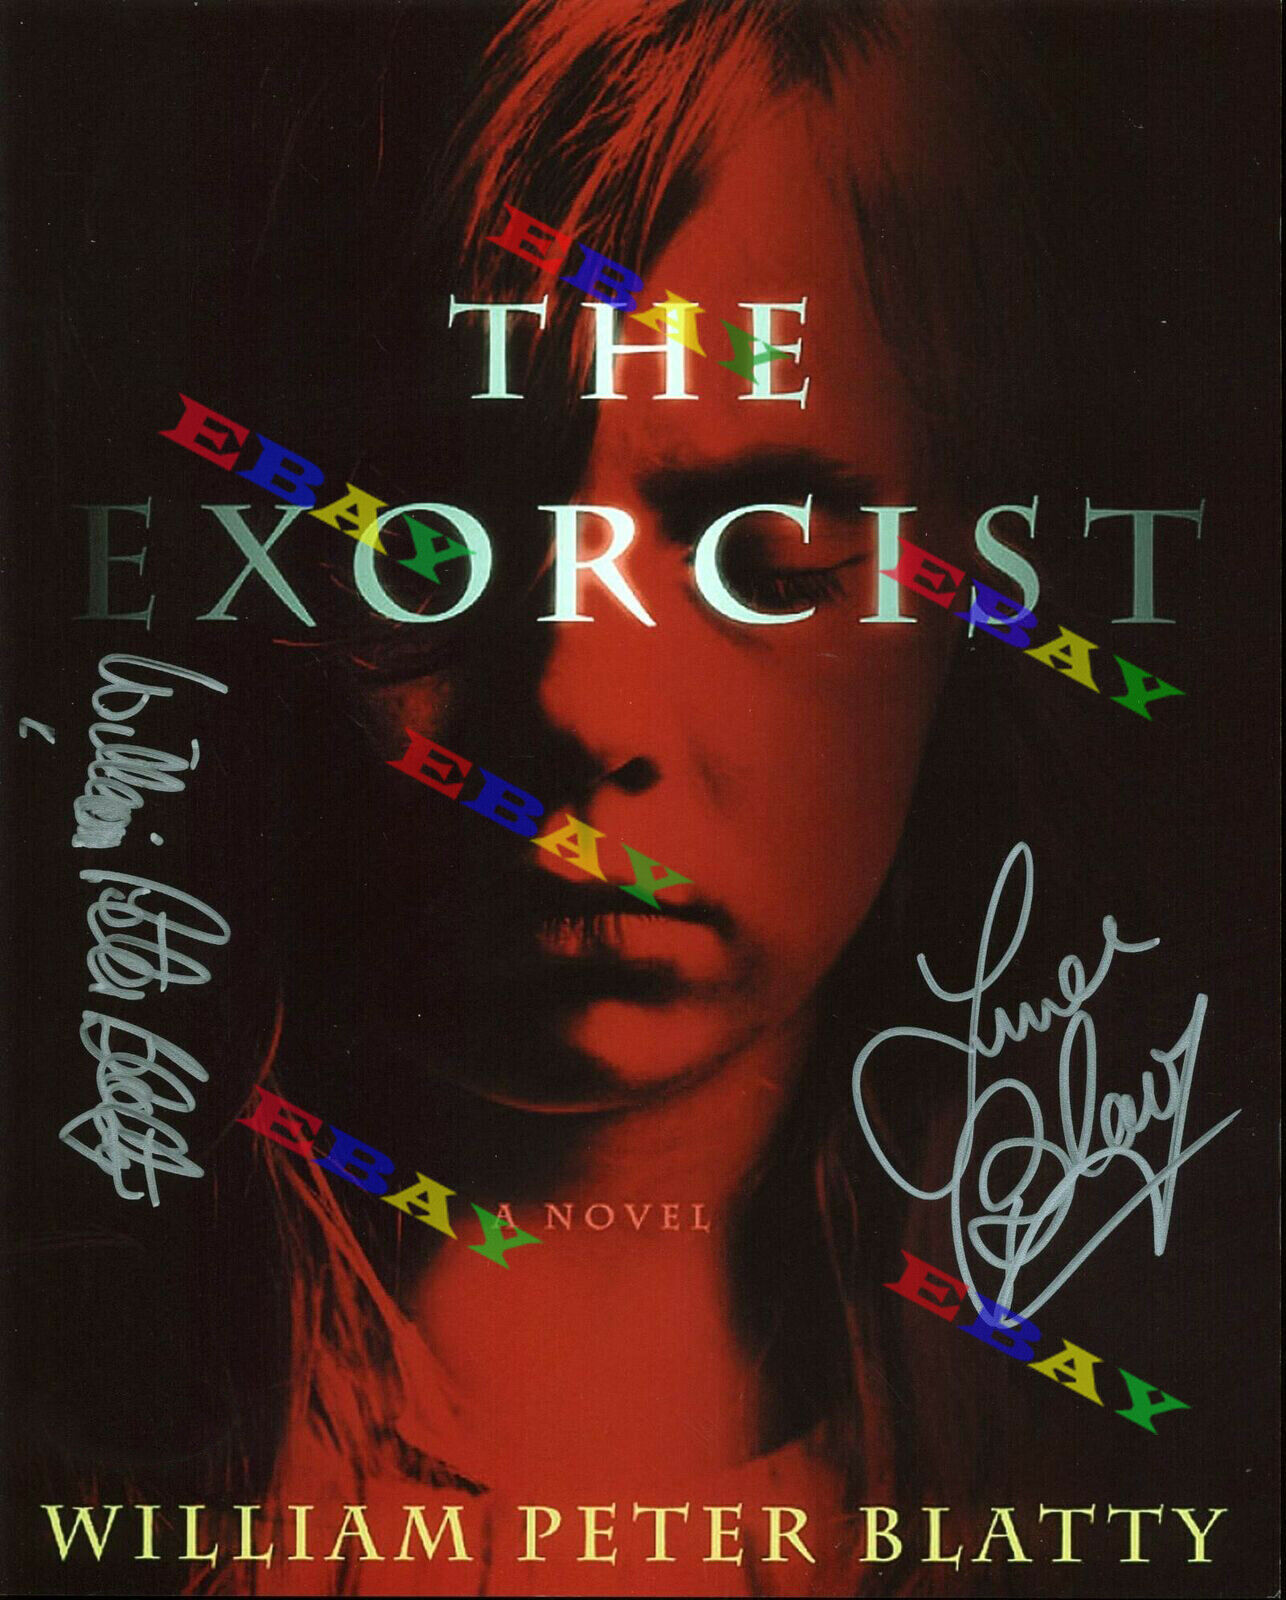 Linda Blair William Peter Blatty The Exorcist Autographed Signed Photo Reprint